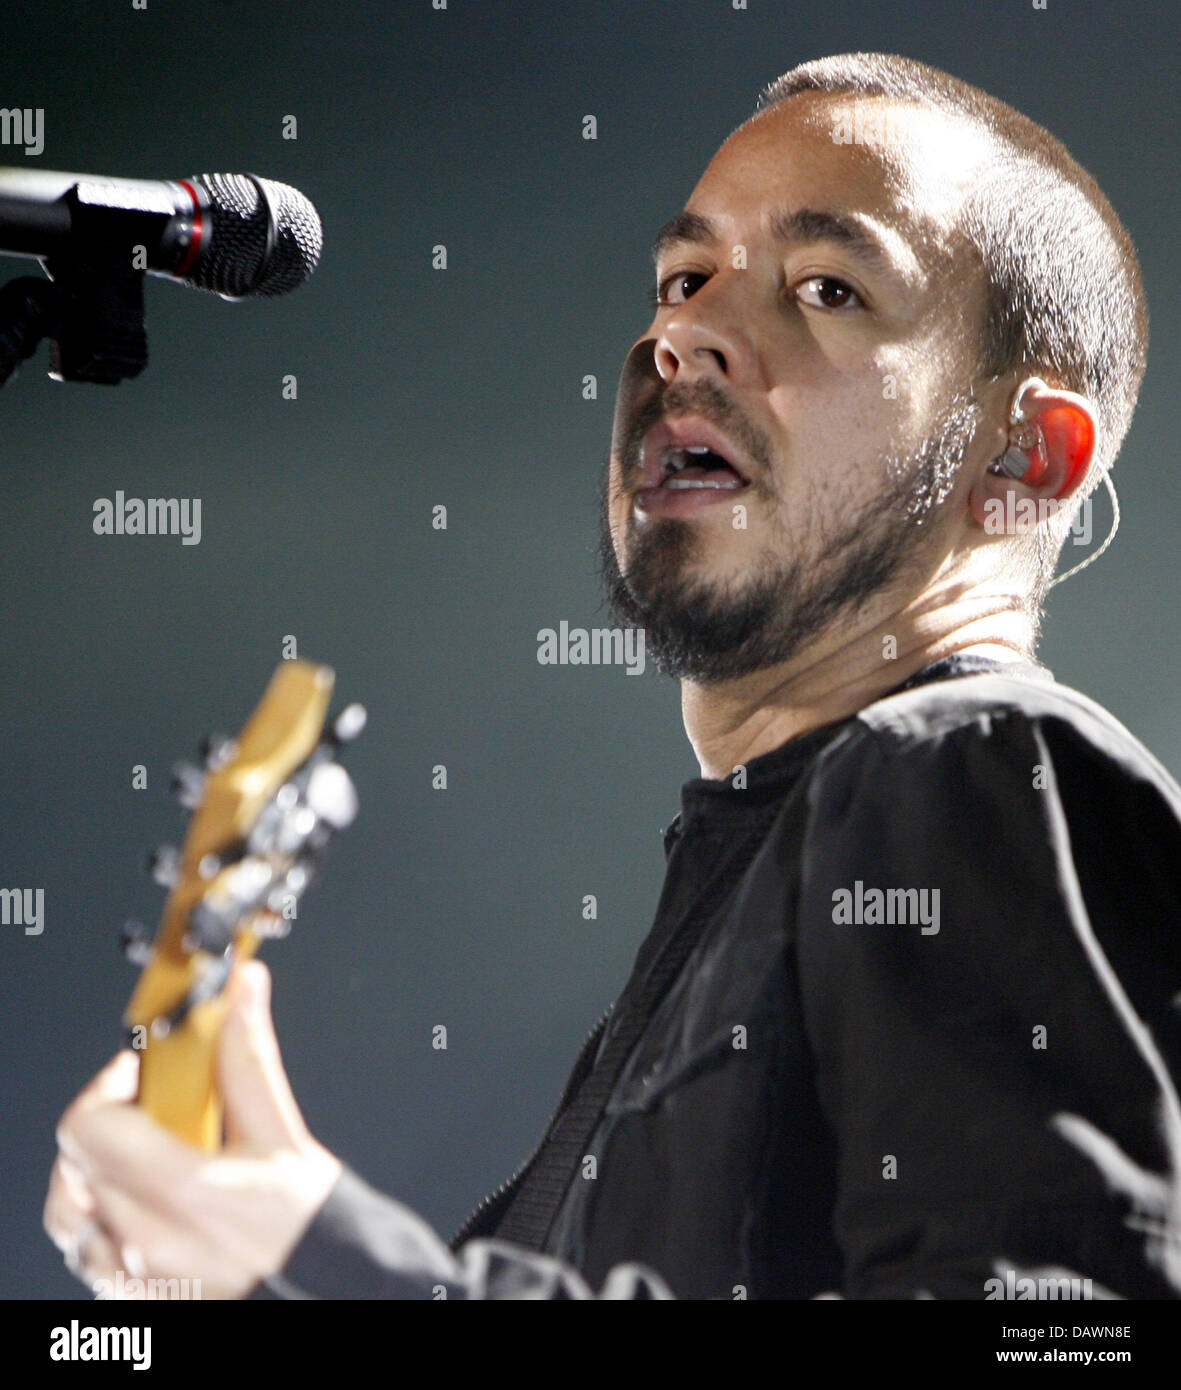 Mike Shinoda of US rock band Linkin Park pictured during a show in Hamburg, Germany, 27 May 2007. The band continues their German tour with the festivals Rock am Ring and Rock im Park on 01 and 02 June. Photo: Sebastian Widmann Stock Photo